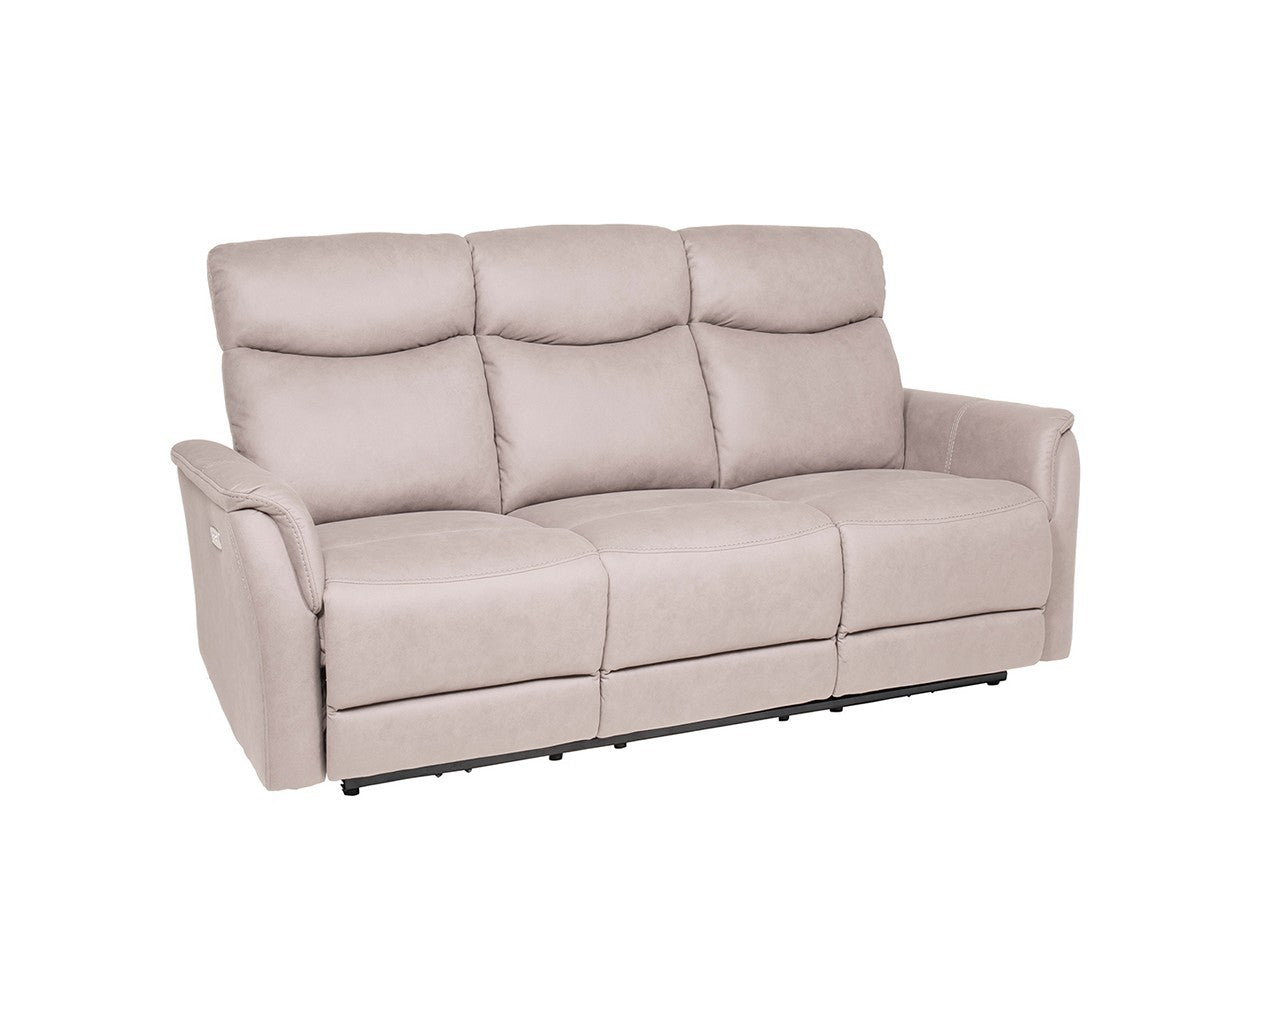 Mortimer - 3 Seater Electric Recliner